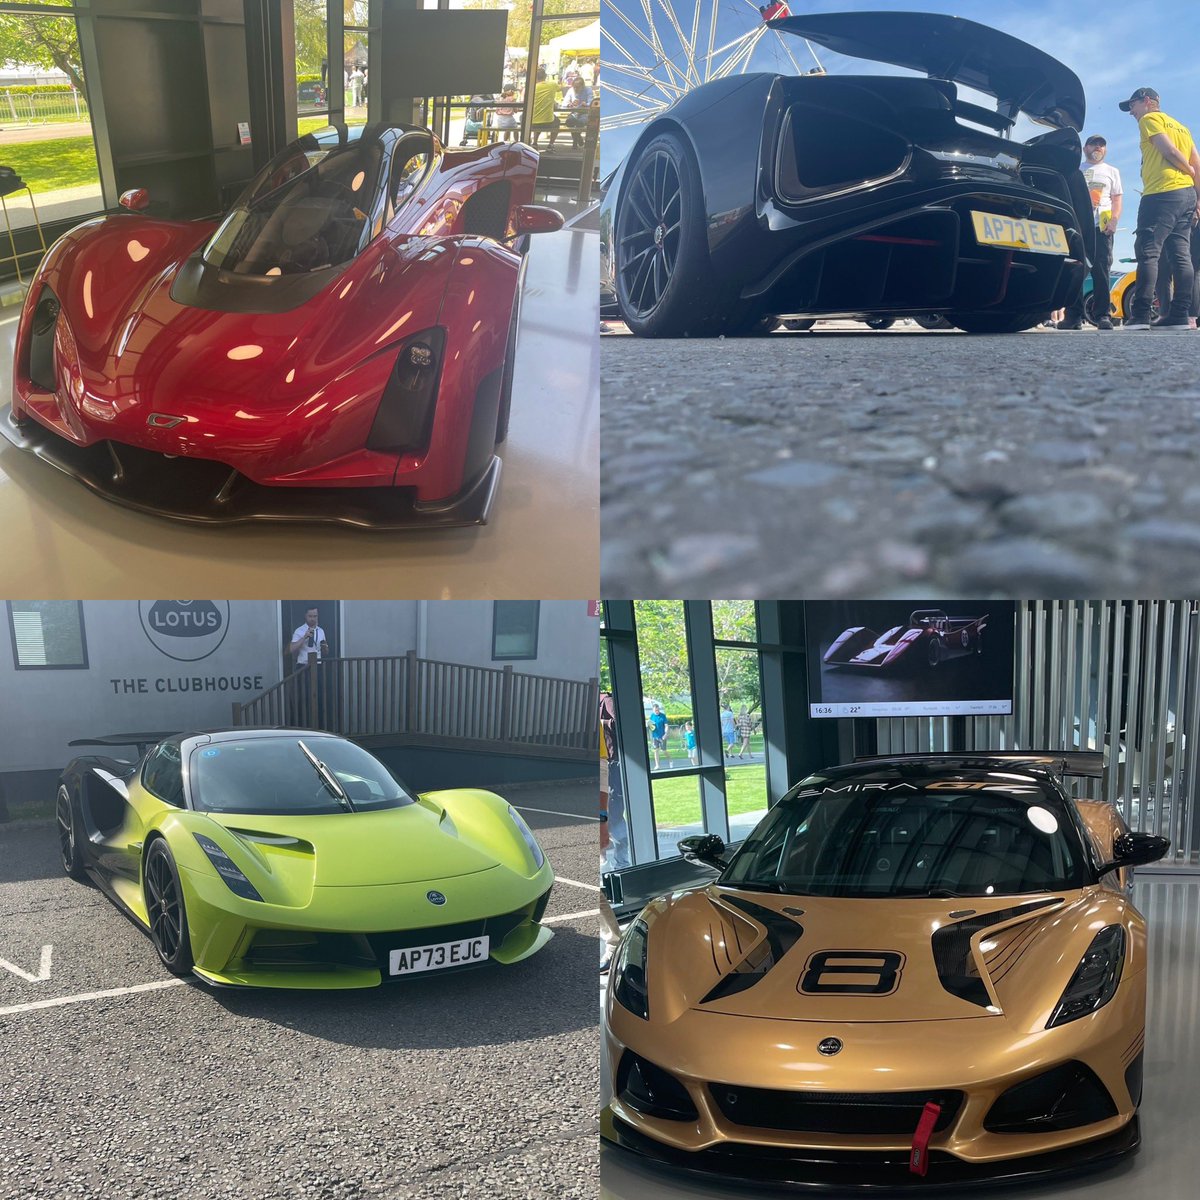 Super few days away in Norwich. Great to see behind the scenes at Lotus Cars with a factory tour where the son calls it work. Some super cars on show. Not too often all the boys are together  #Lotus #Evija